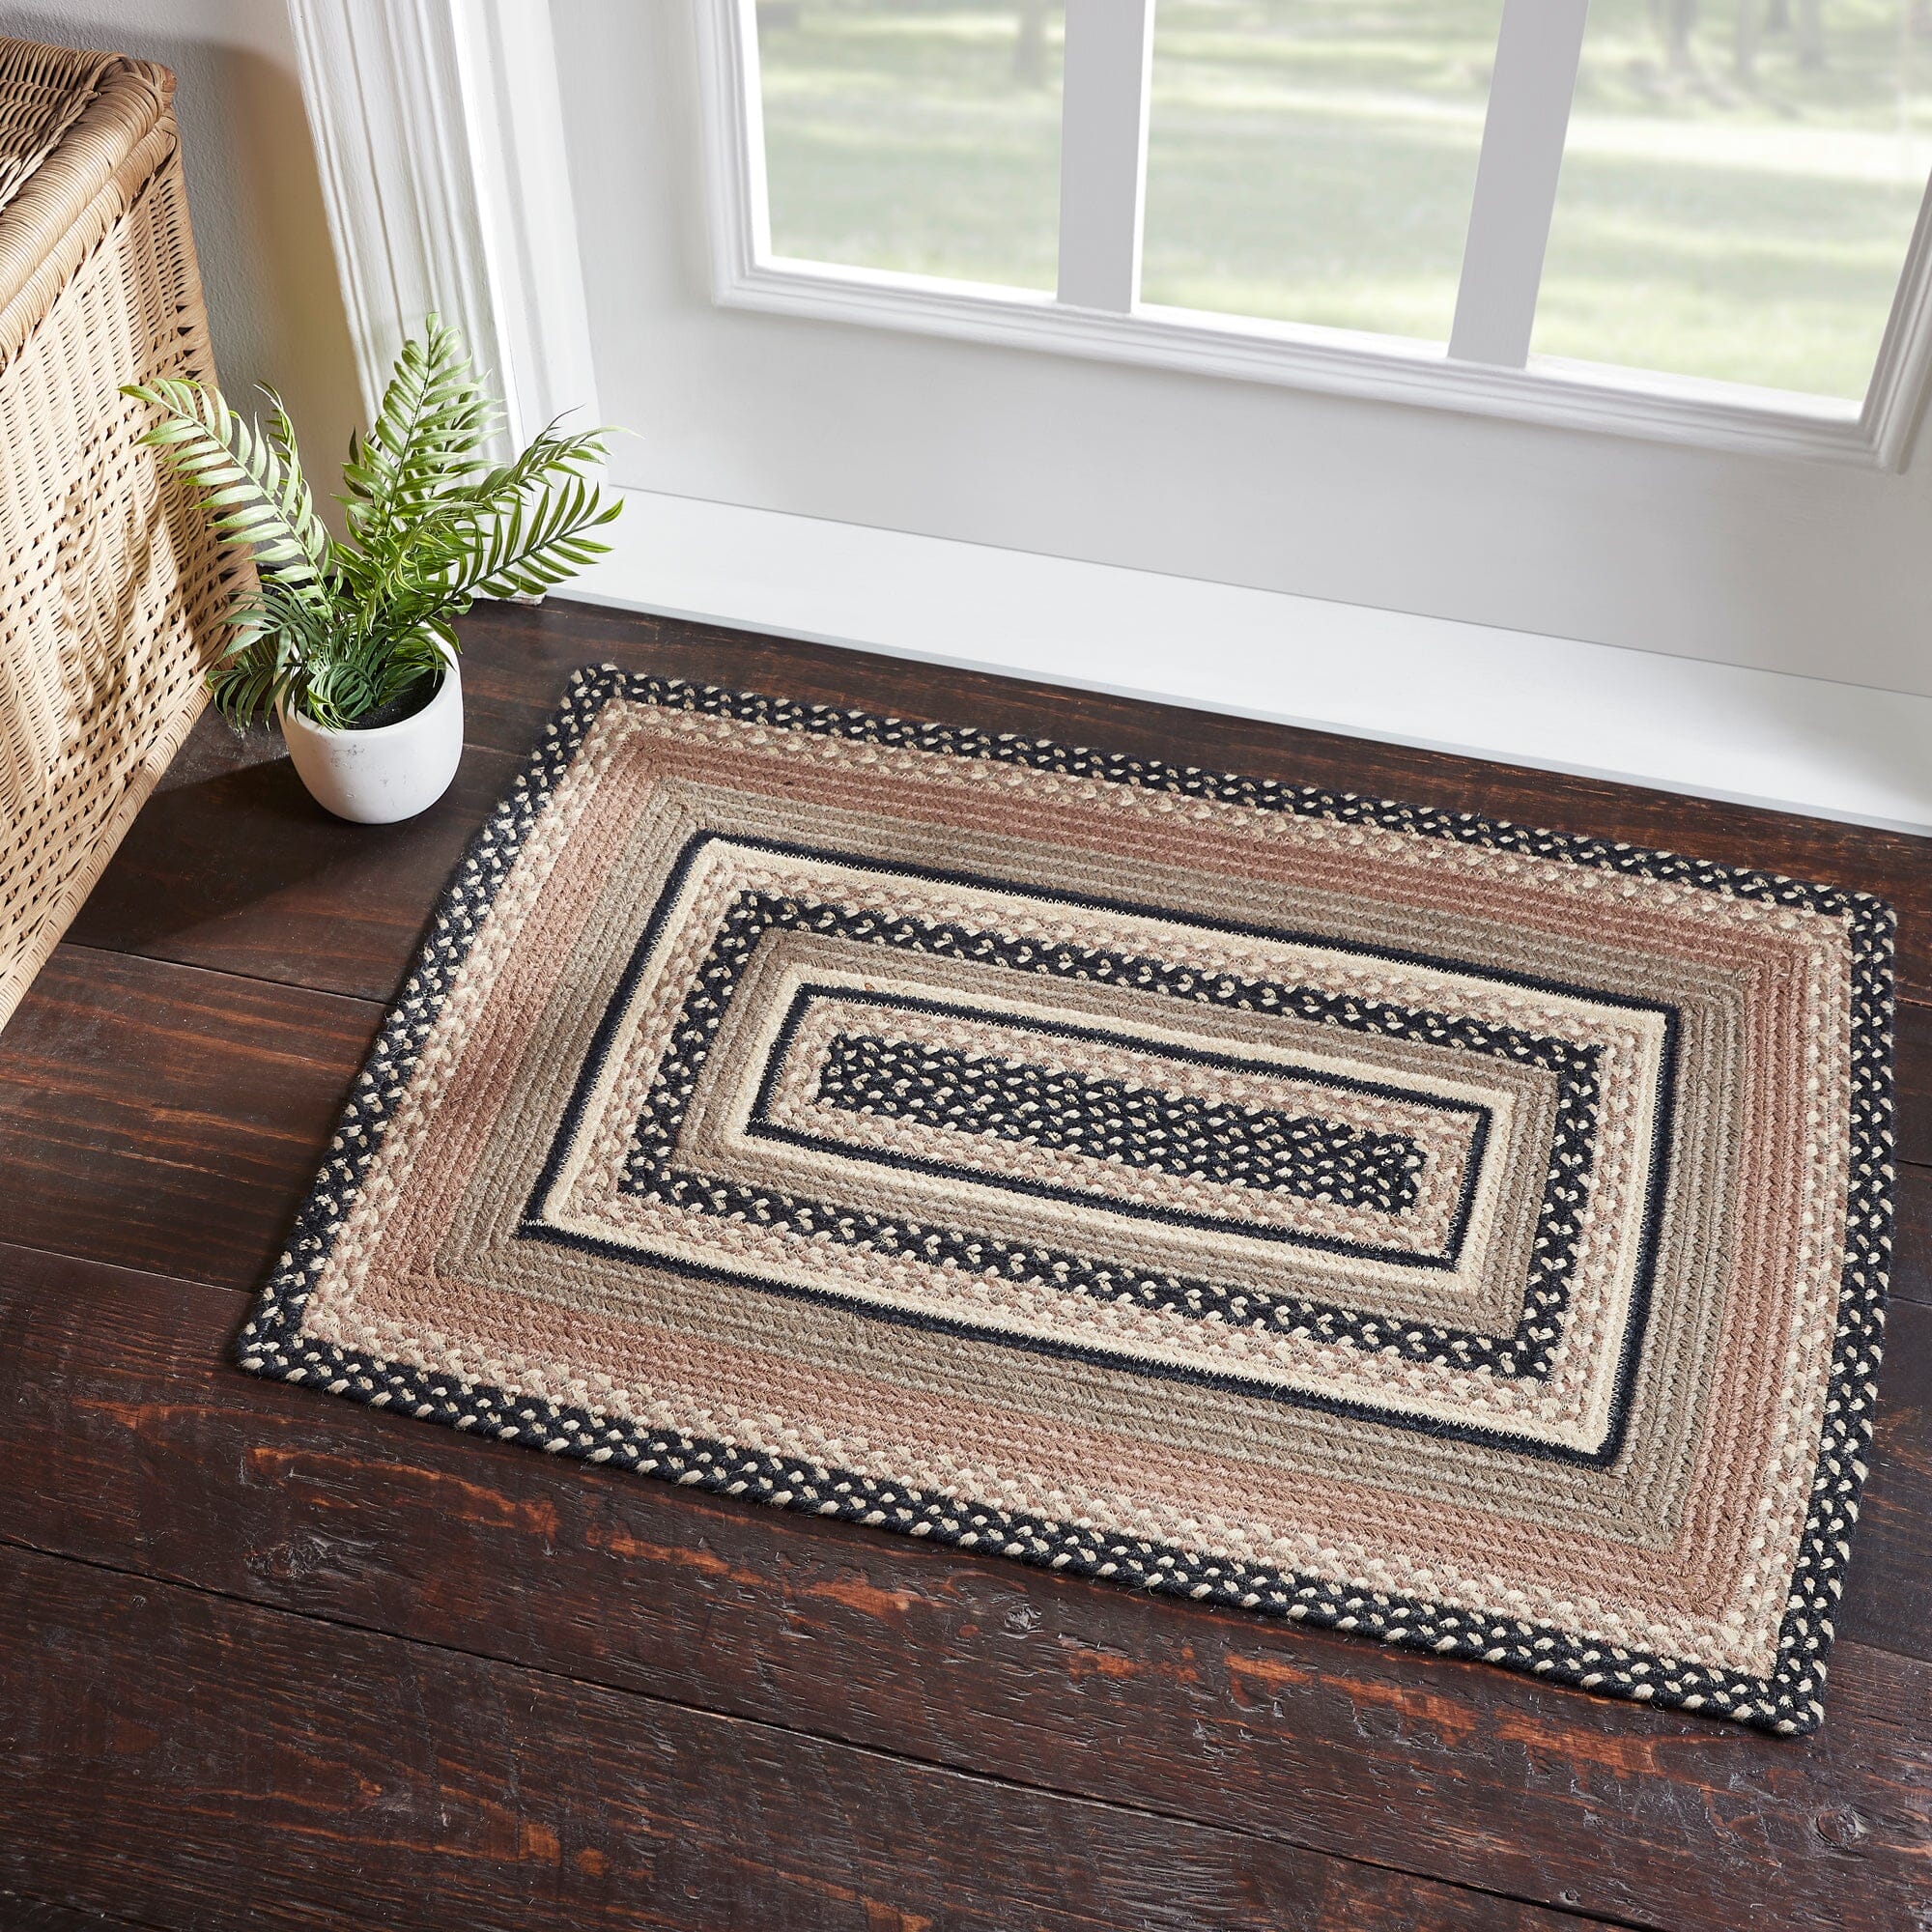 Primitive Rugs  Hand-Hooked and Braided Country Rugs